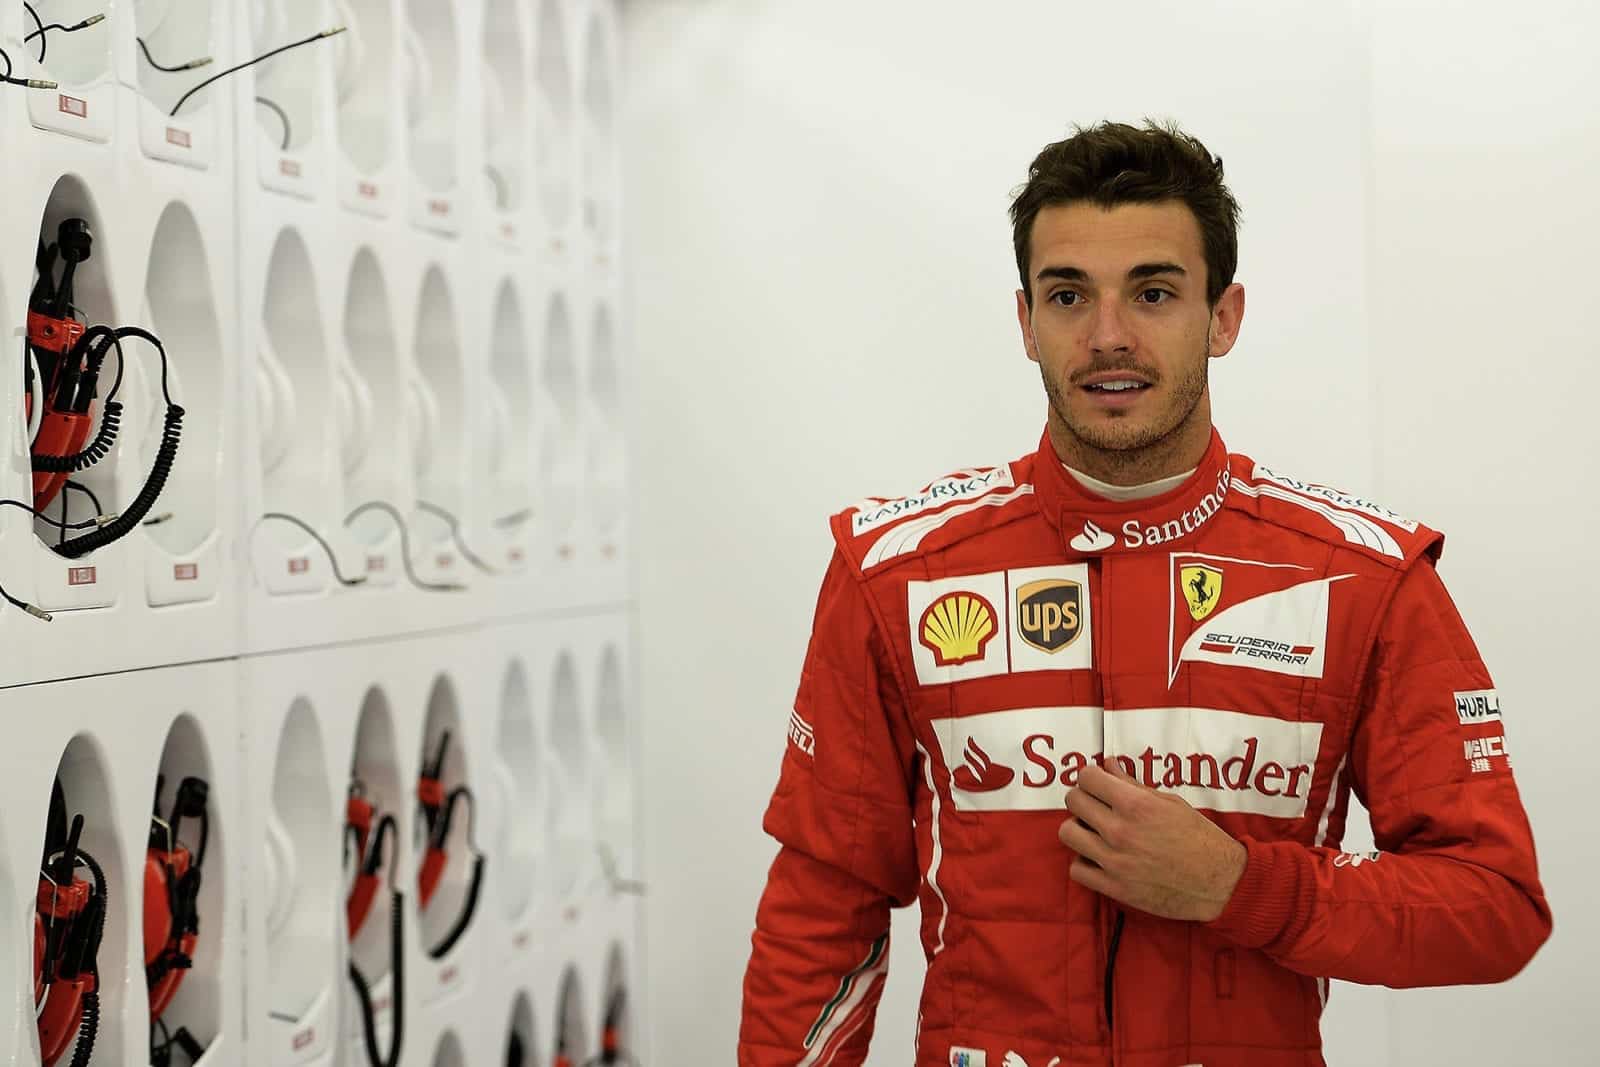 Jules BIanchi in Ferrari overalls at a 2014 F1 test at Silverstone